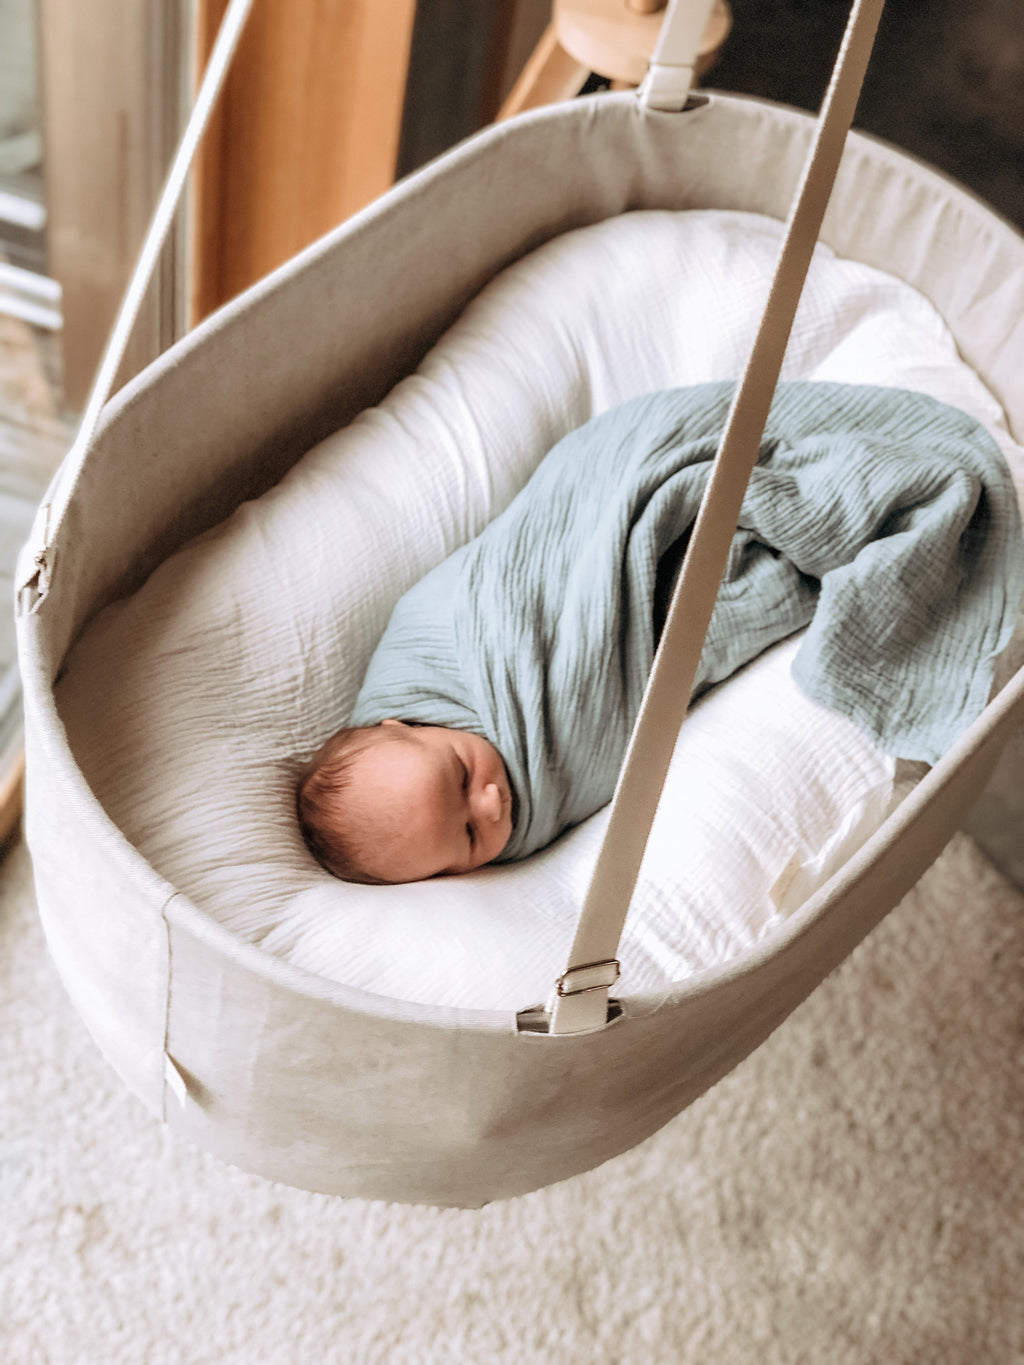 hanging cradle, perfect  baby bed, snuggle baby bed, cozy baby cradle, safe baby bassinet, natural baby bassinet, sensory baby cradle, sensory baby bassinet, rocking cradle, baby muslin swaddle, gauze muslin swaddle, large swaddle, large muslin swaddle, sensory lounger, sensory newborn lounger, sensory baby nest, snuggle nest